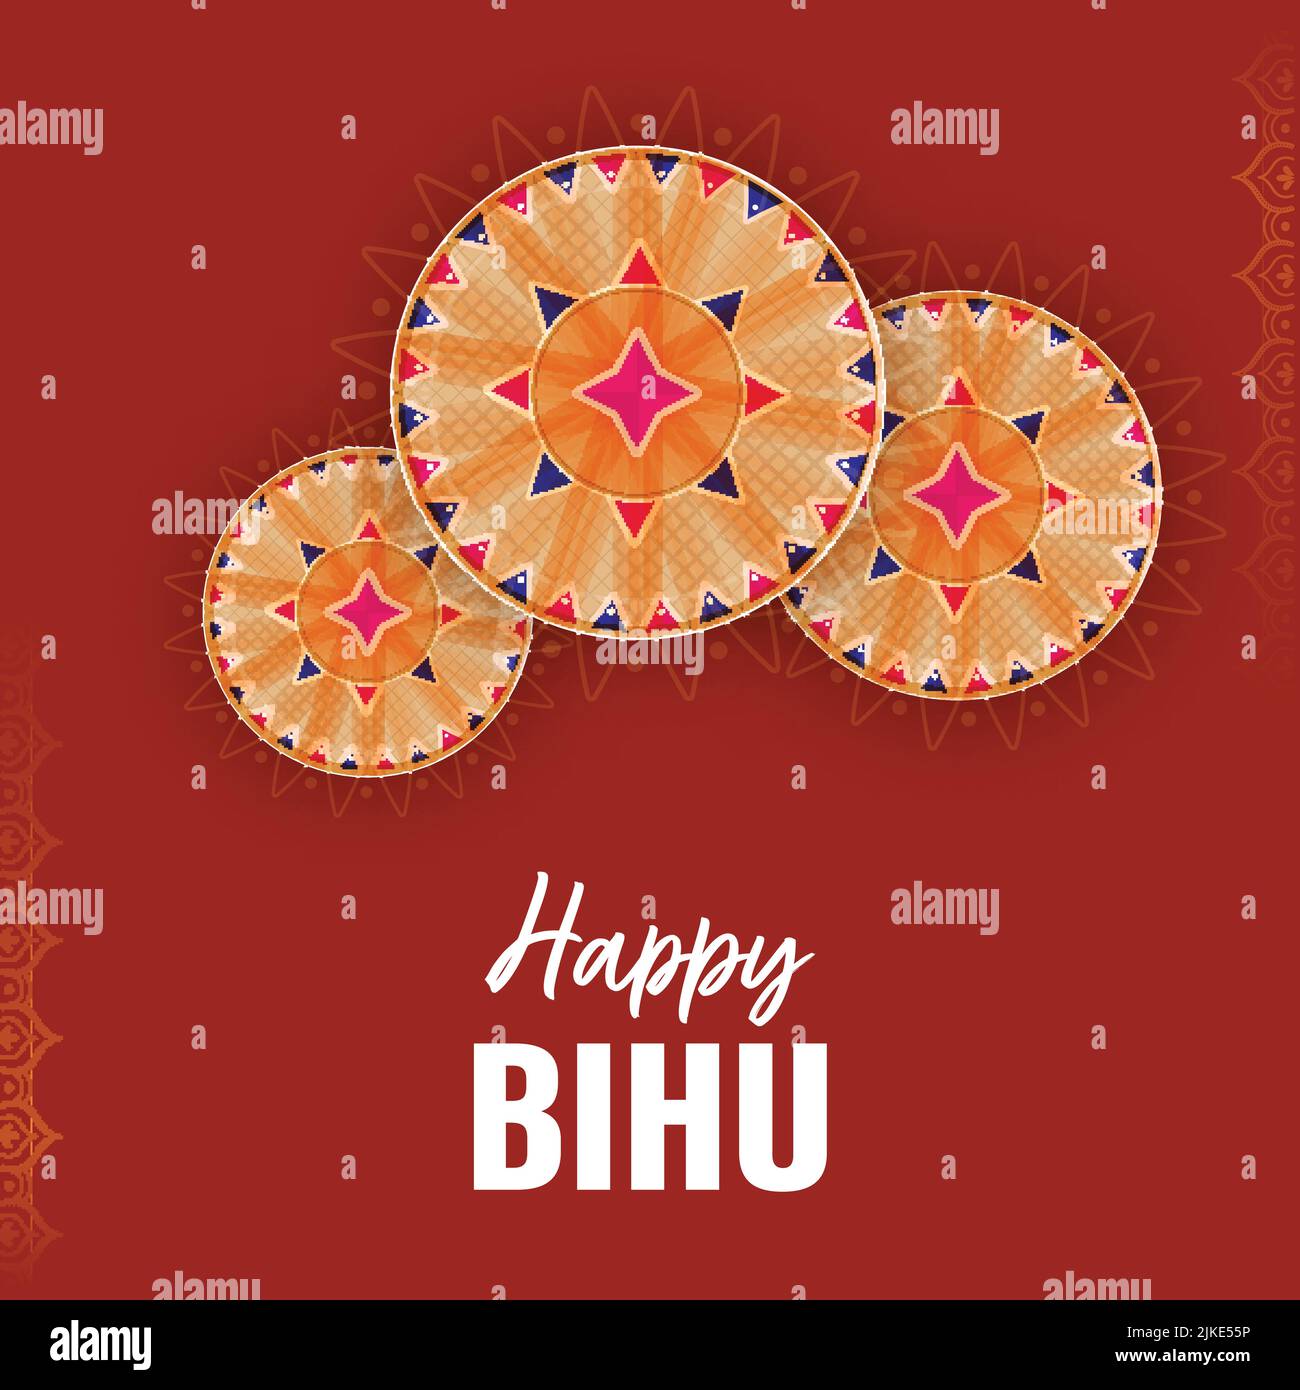 Musical instrument of bihu festival Stock Vector Images - Alamy